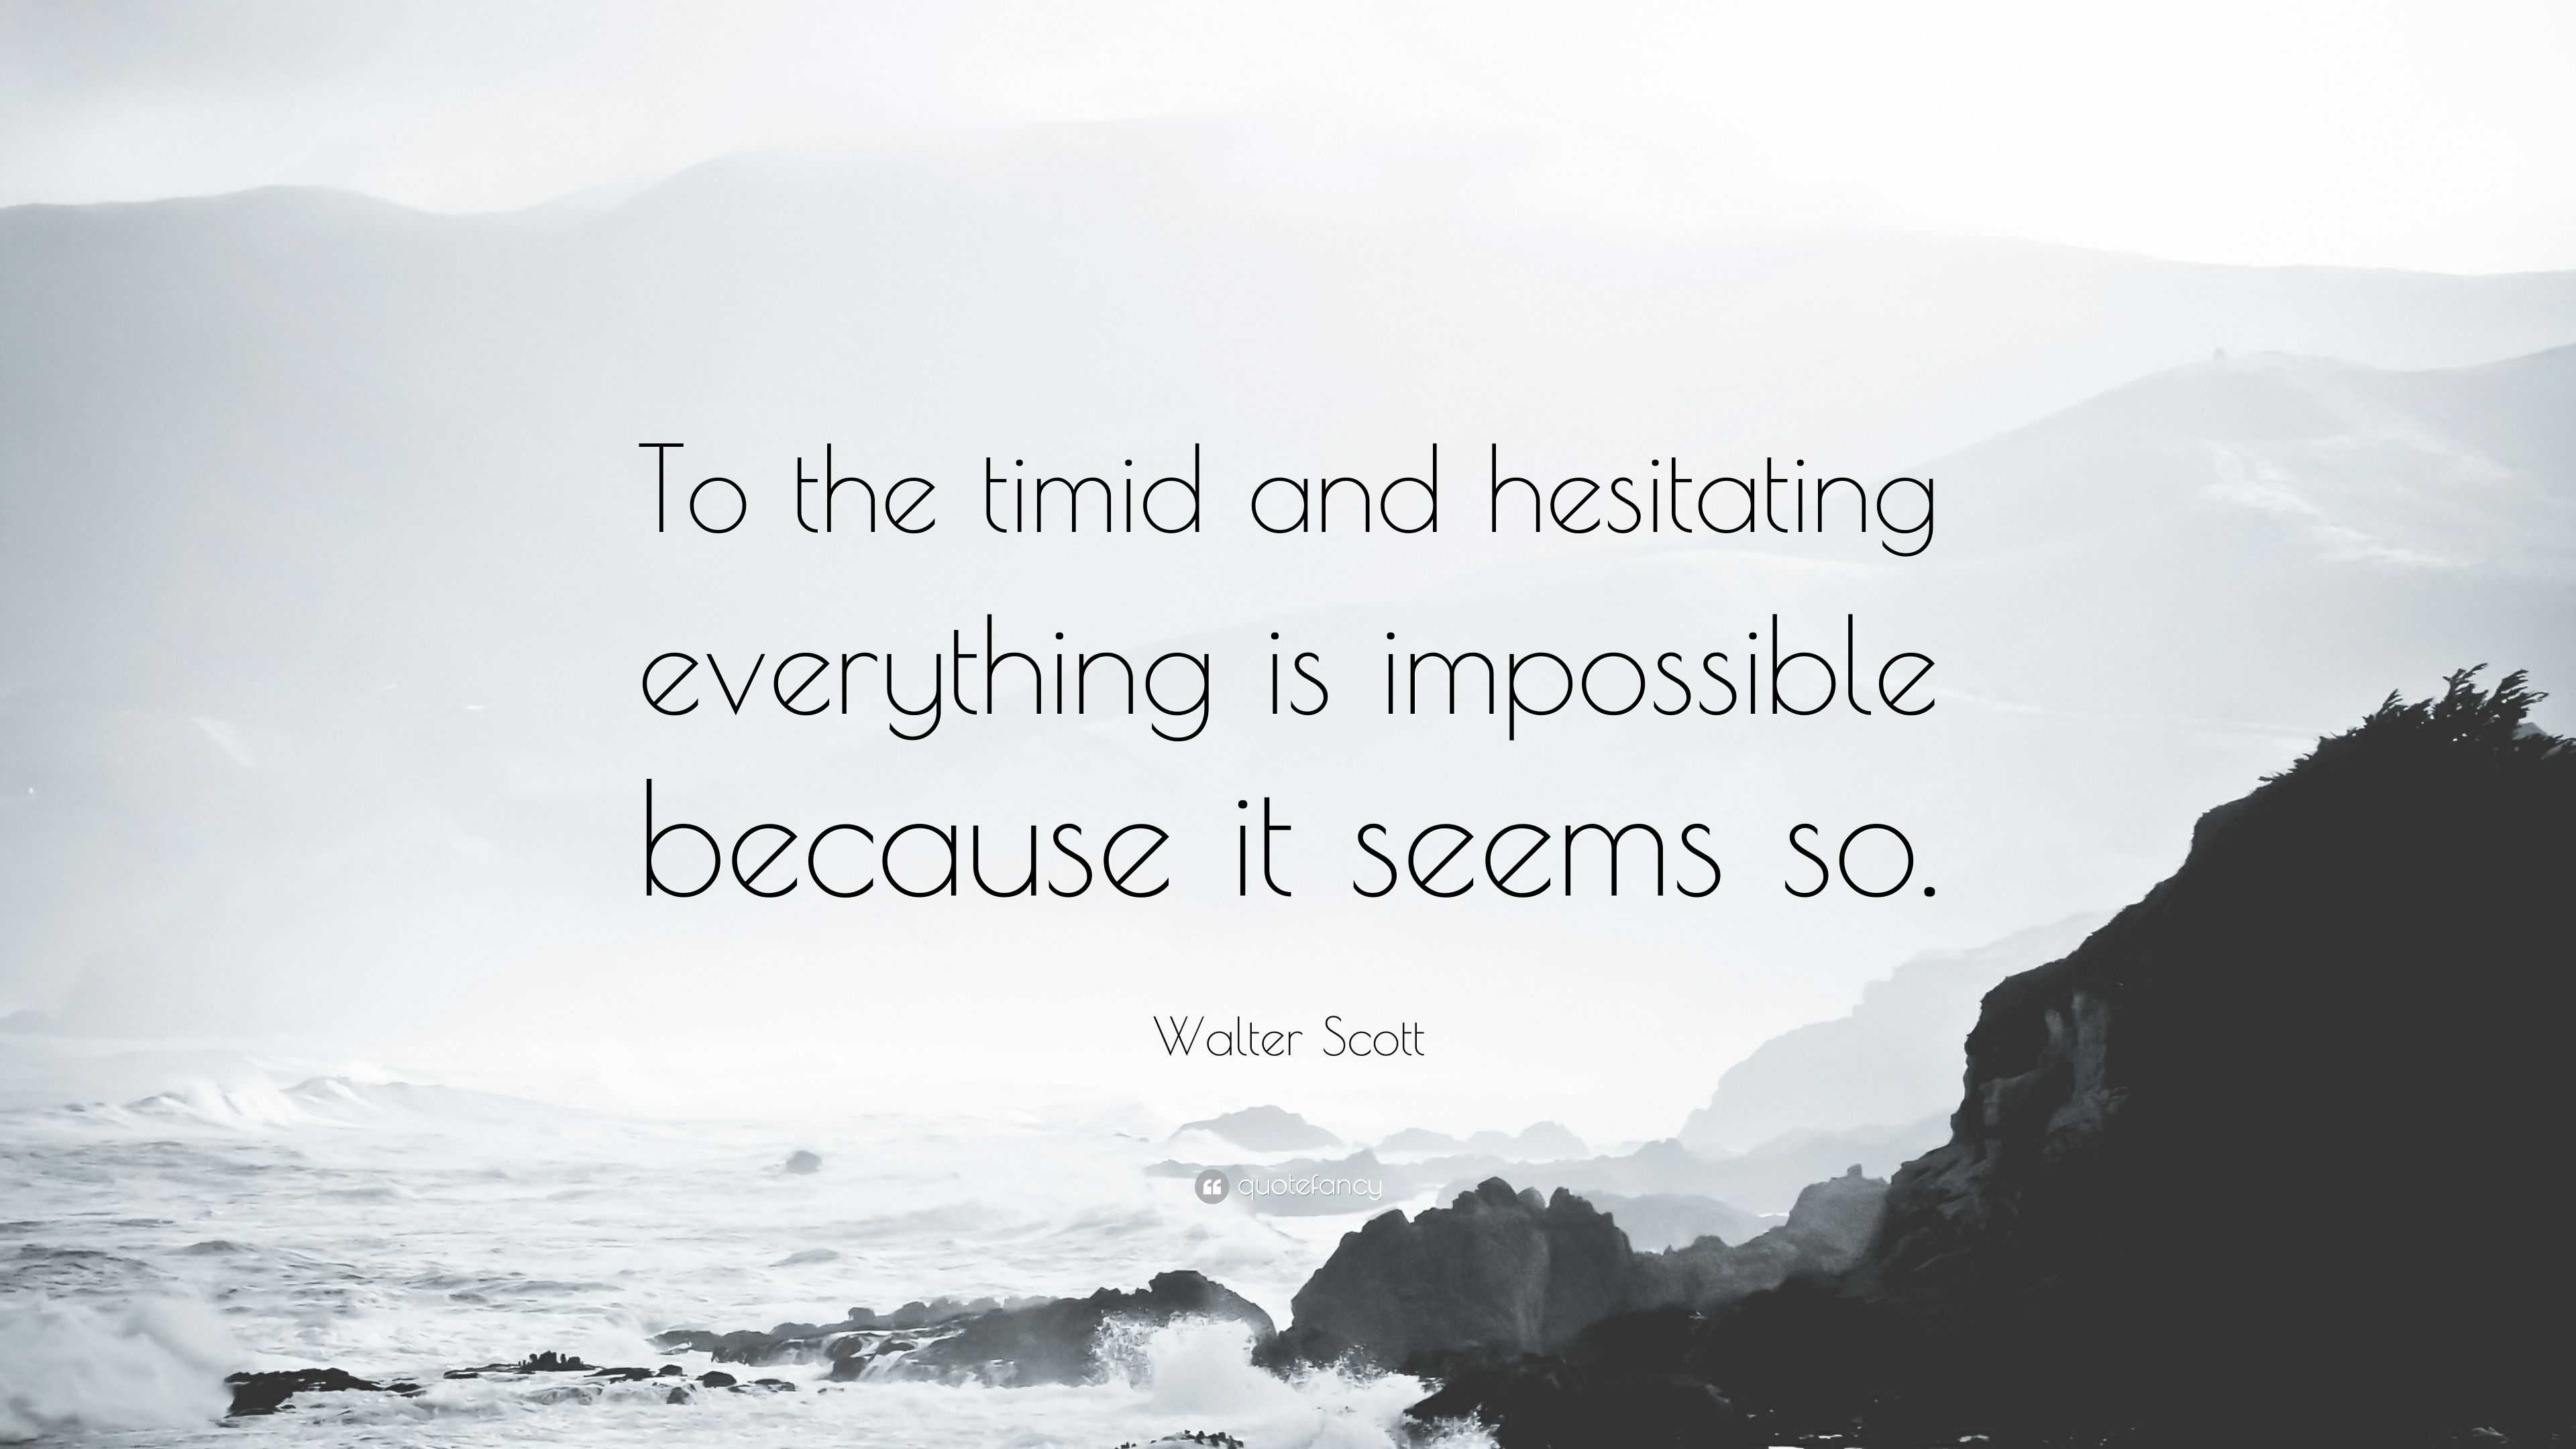 Walter Scott Quote: “To the timid and hesitating everything is impossible  because it seems so.”